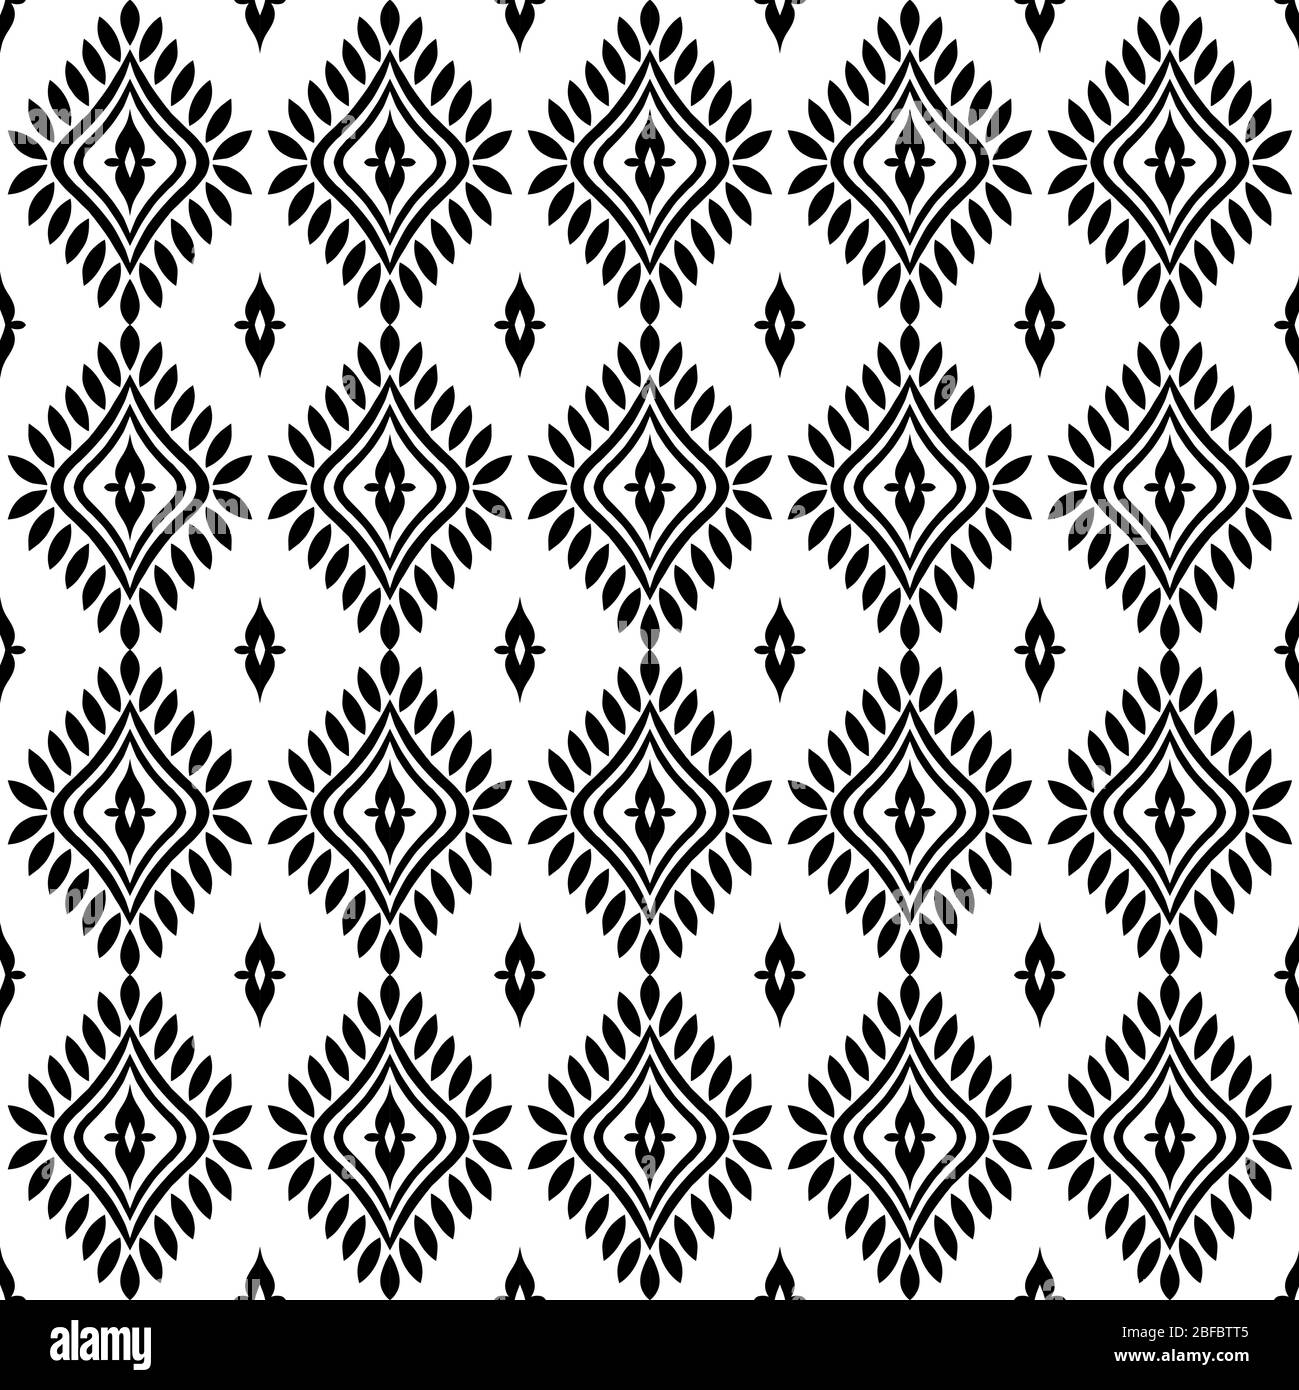 Black and white decorative geometric pattern. Texture design: textiles, seamless wallpaper, wrapping paper wall decor tile background. Stock Vector